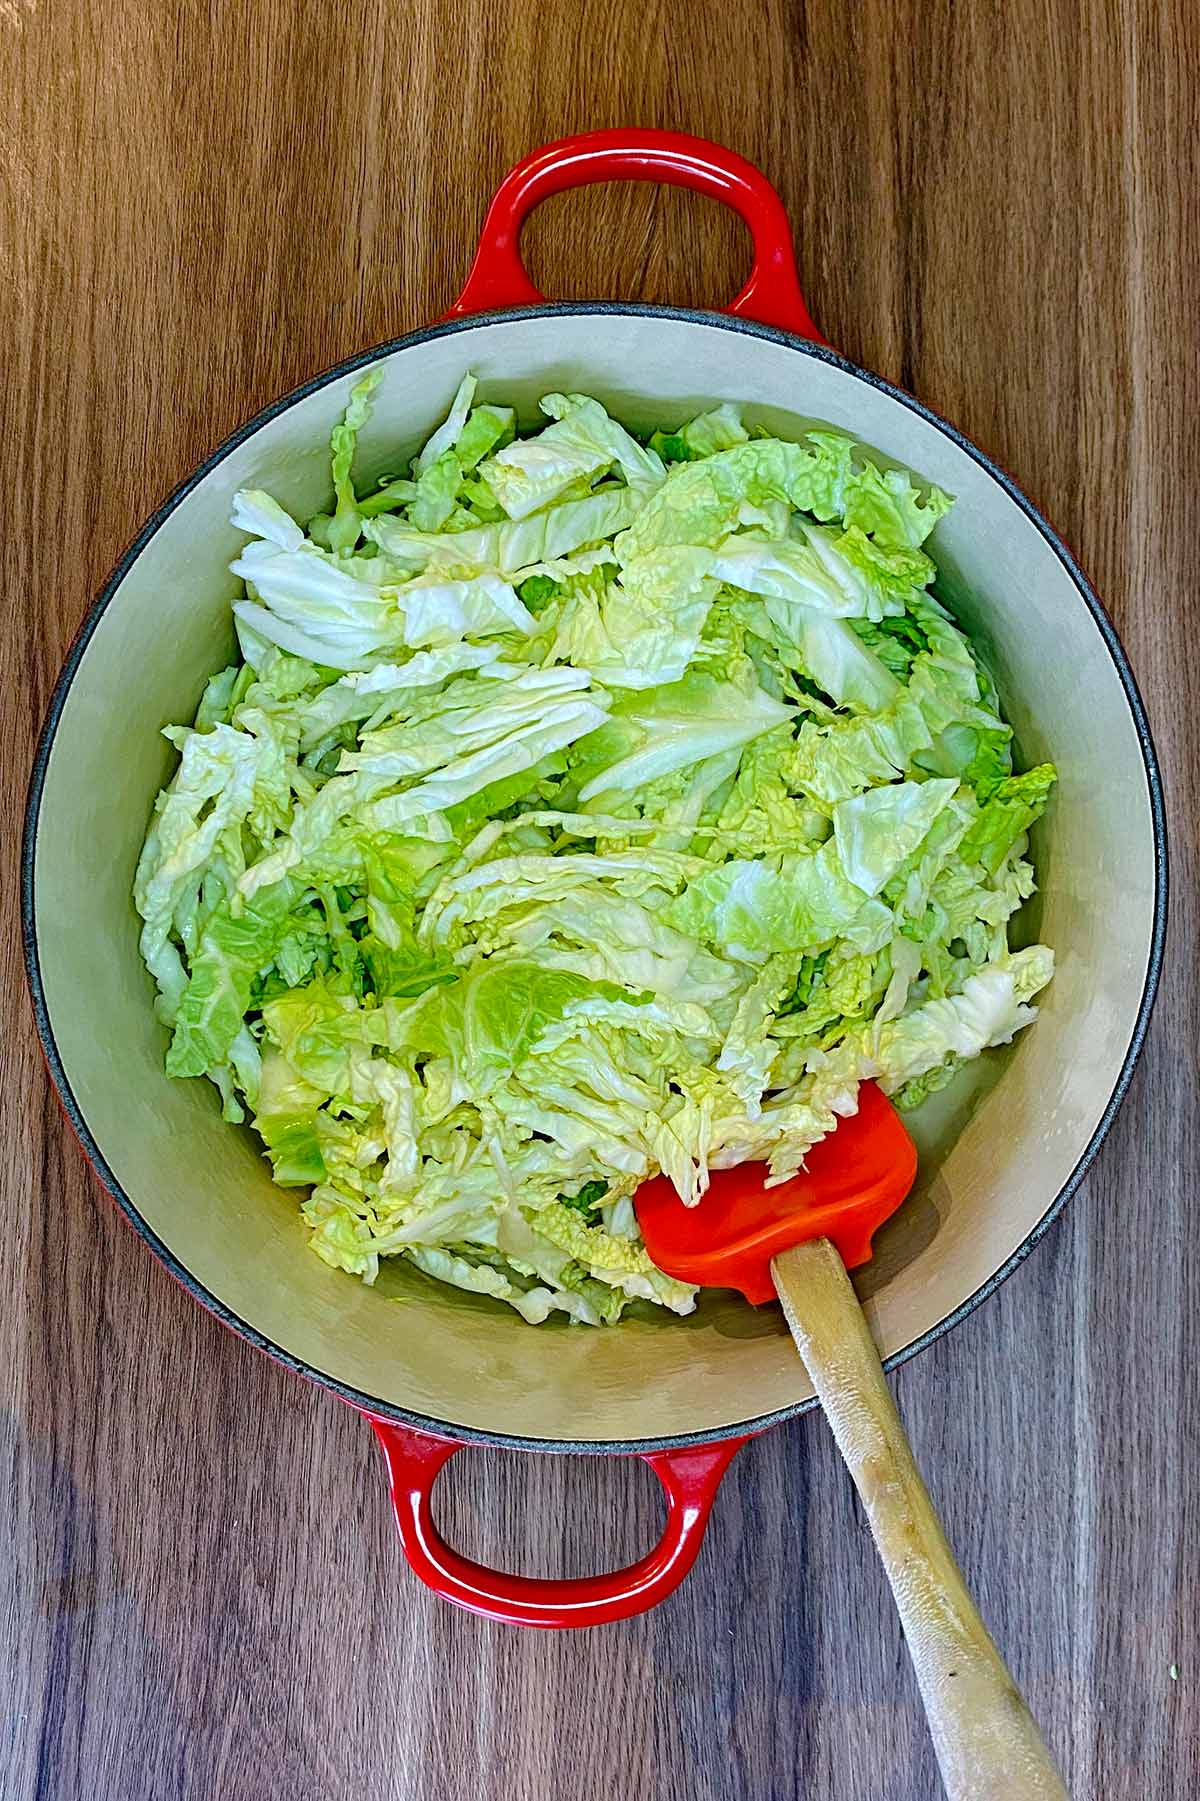 Shredded cabbage added to the pan.